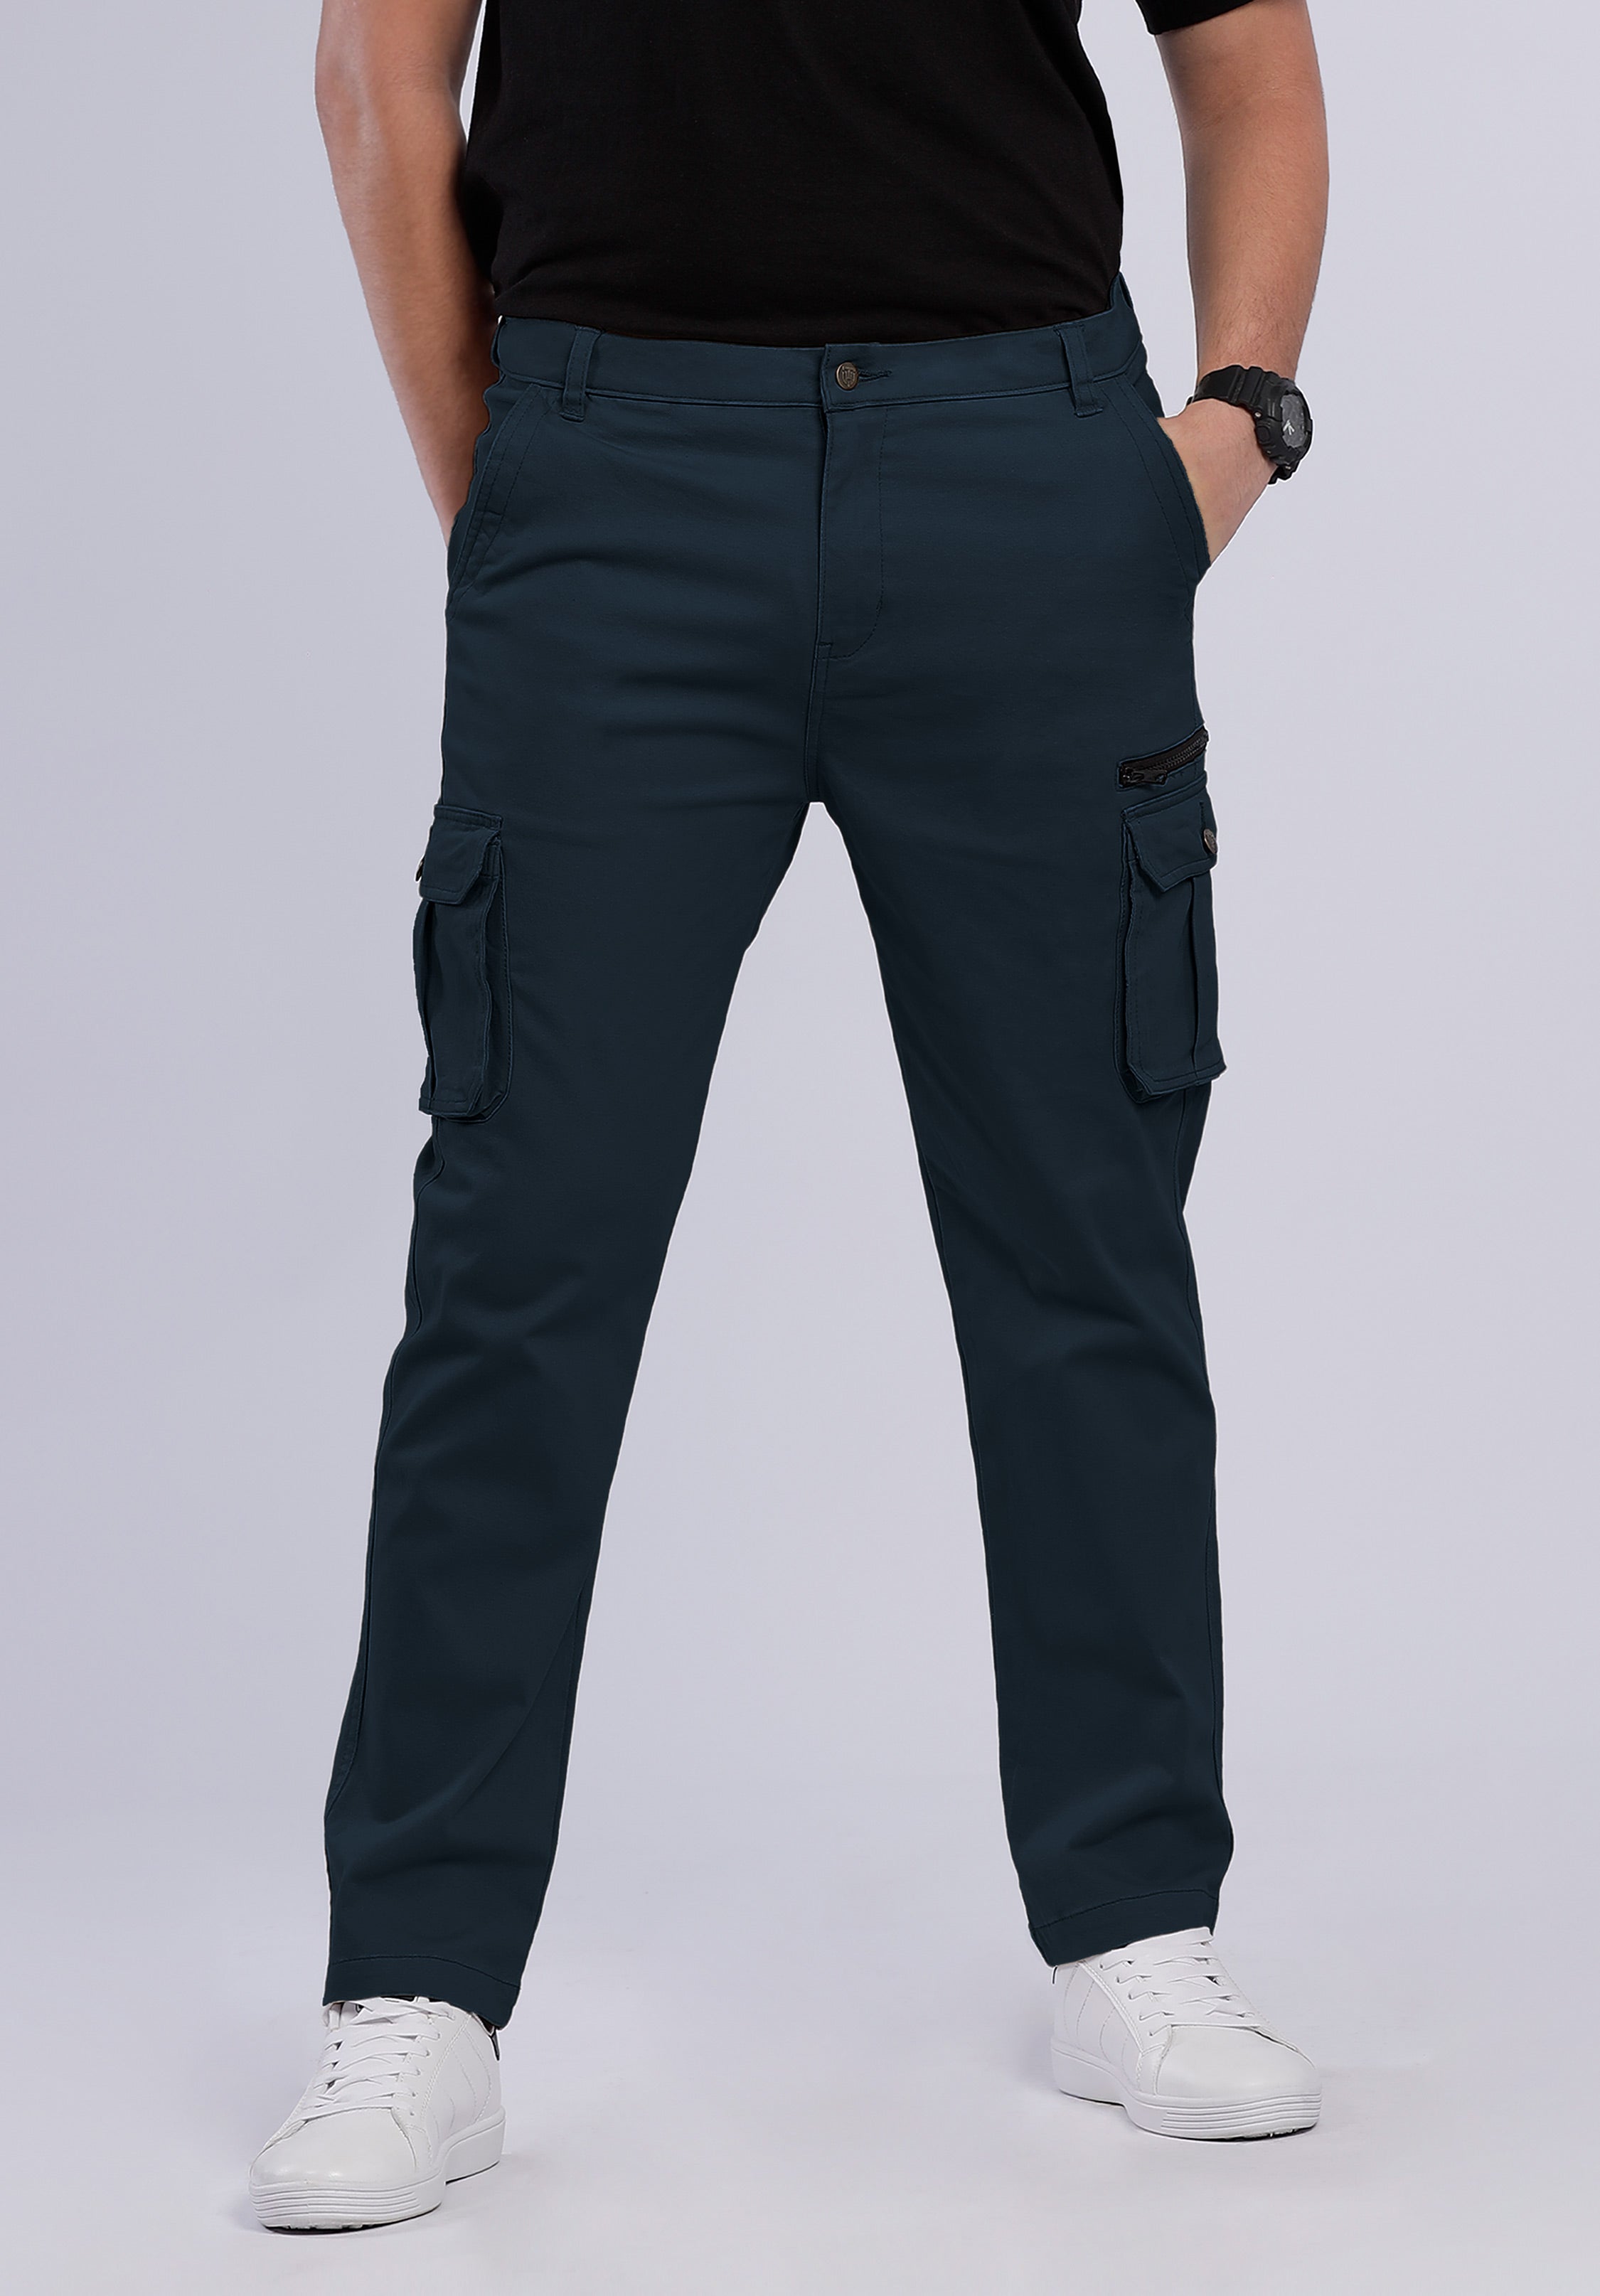 SPACE CARGO PANTS